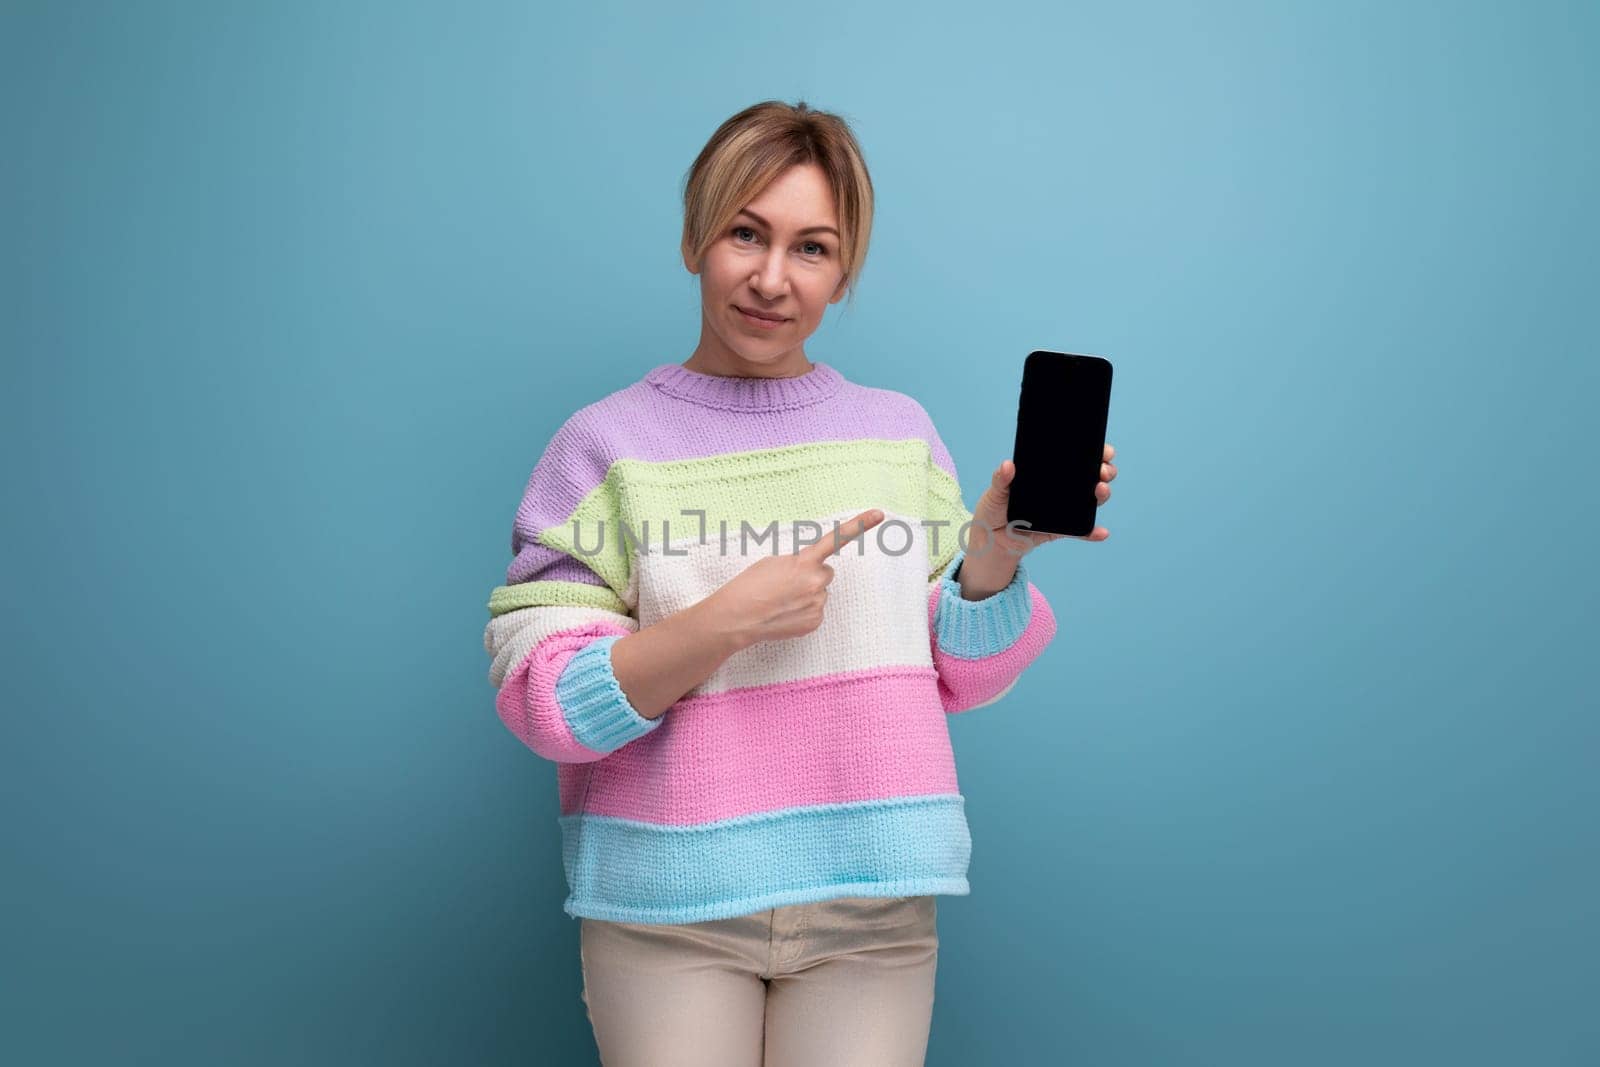 pleasant blond young woman in a striped sweater demonstrates a smartphone mockup on a blue background.